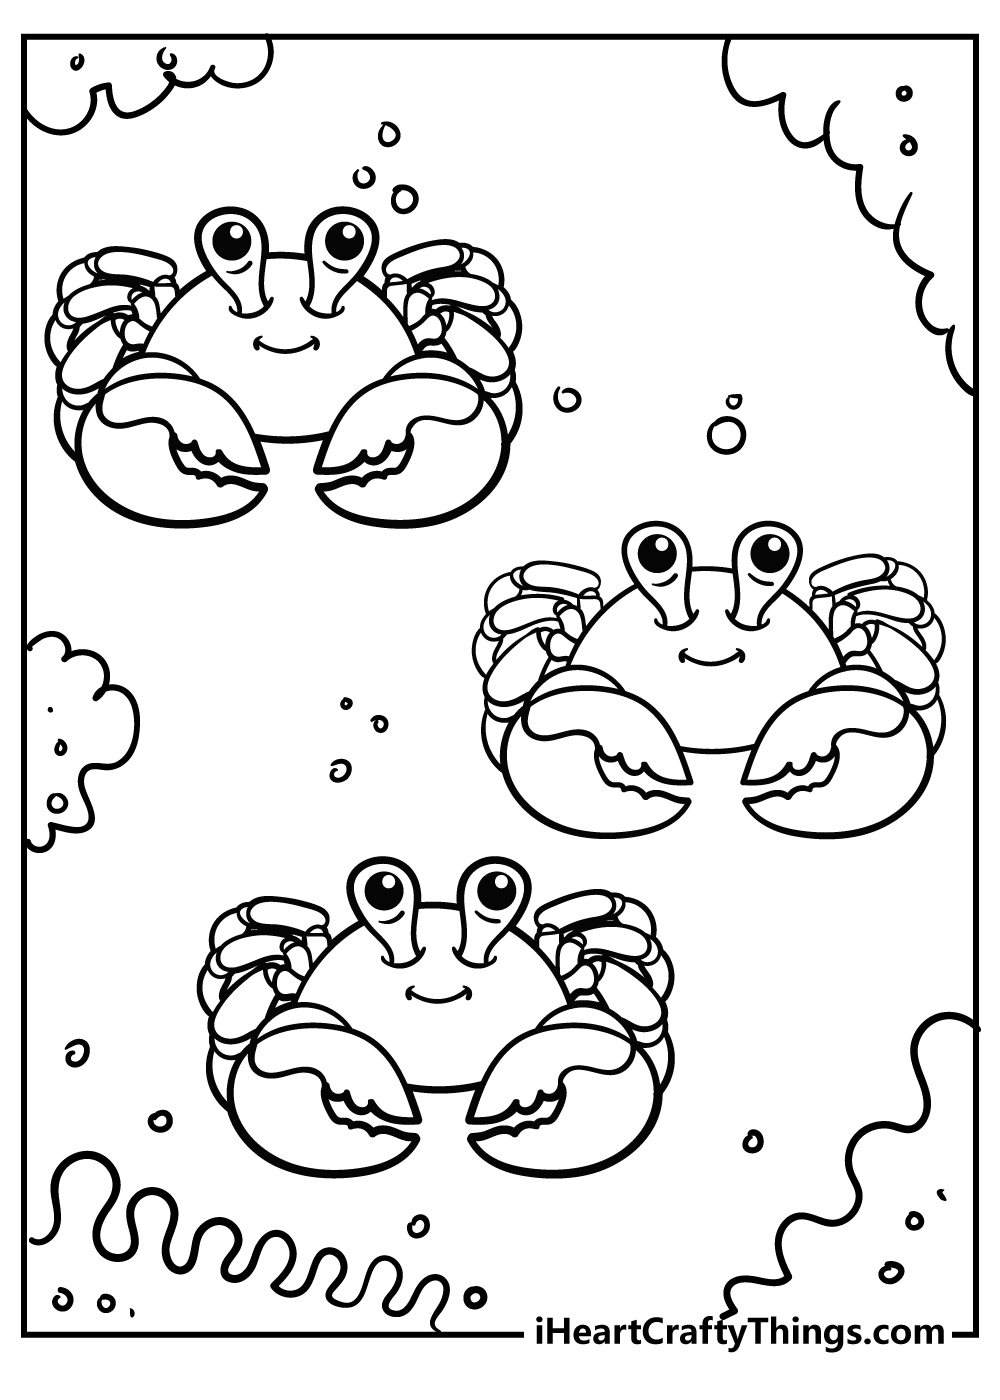 Sea Creature Coloring Pages for kids free download